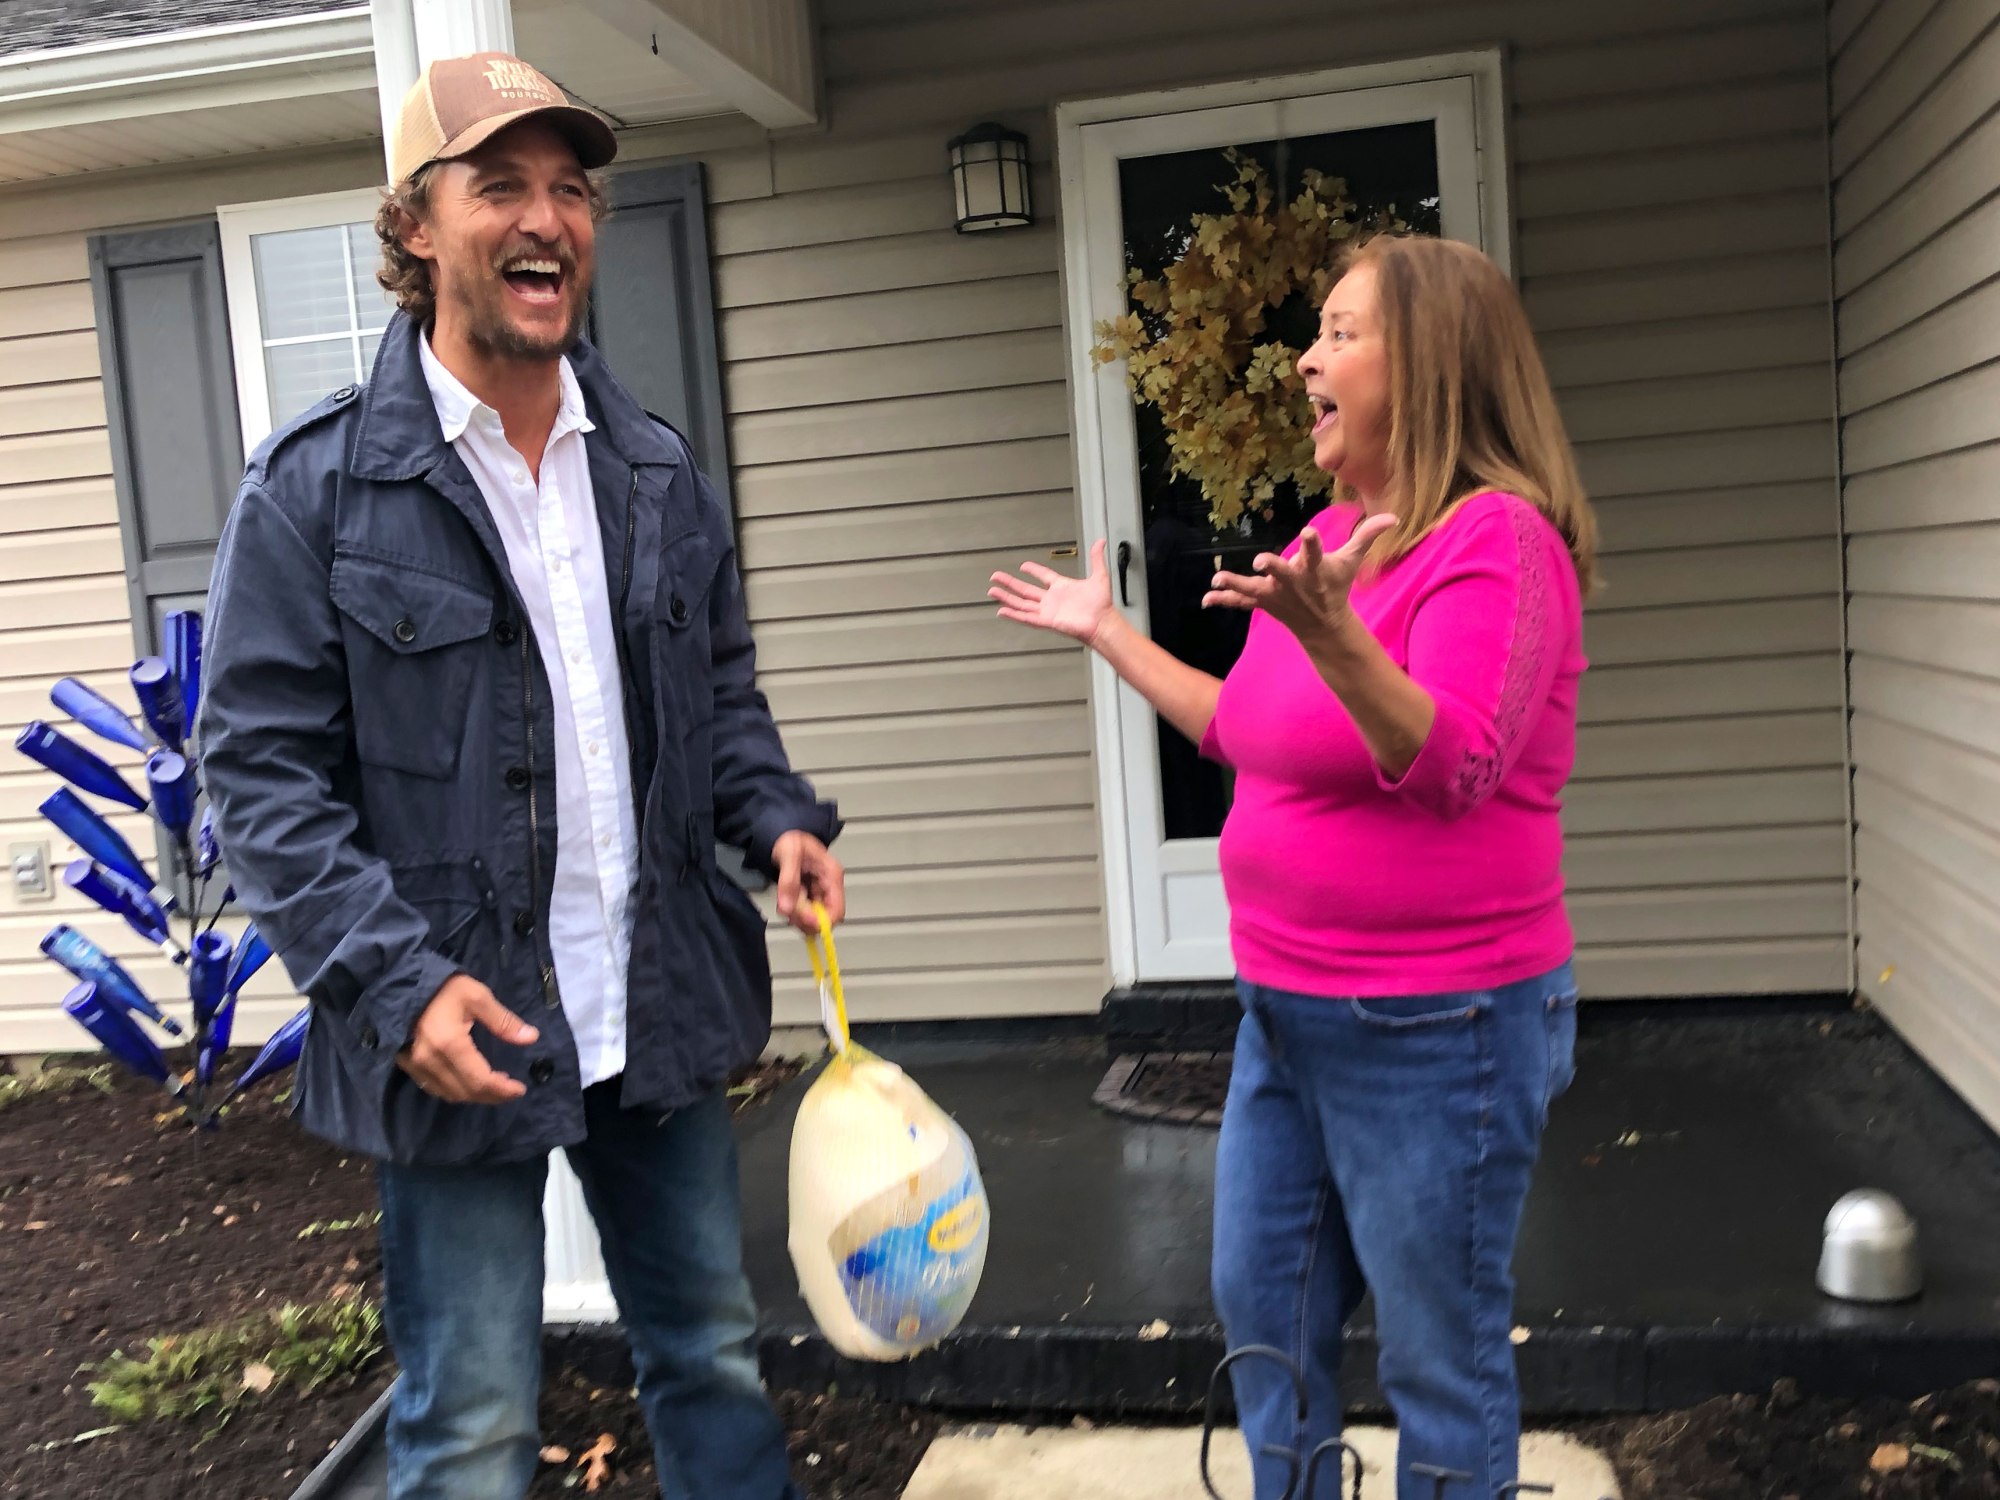 matthew-mcconaughey-celebrates-his-48th-birthday-by-handing-out-4500-turkeys-awesome